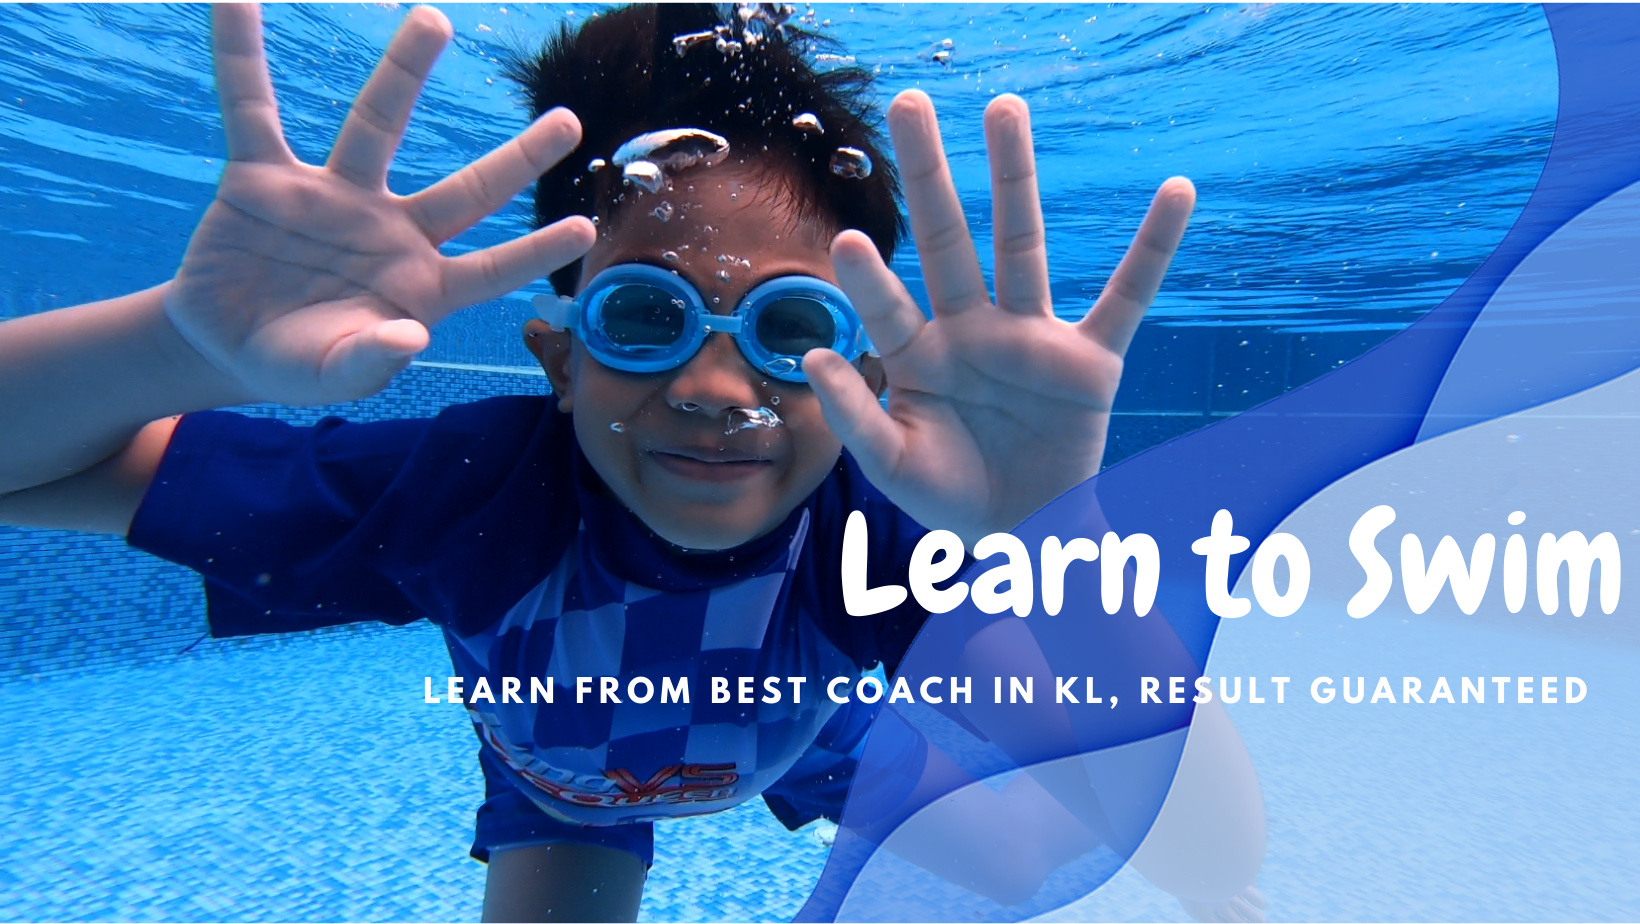 Onsite Private Kid's Swimming Lesson at Sungai Buloh by Swim Up Academy